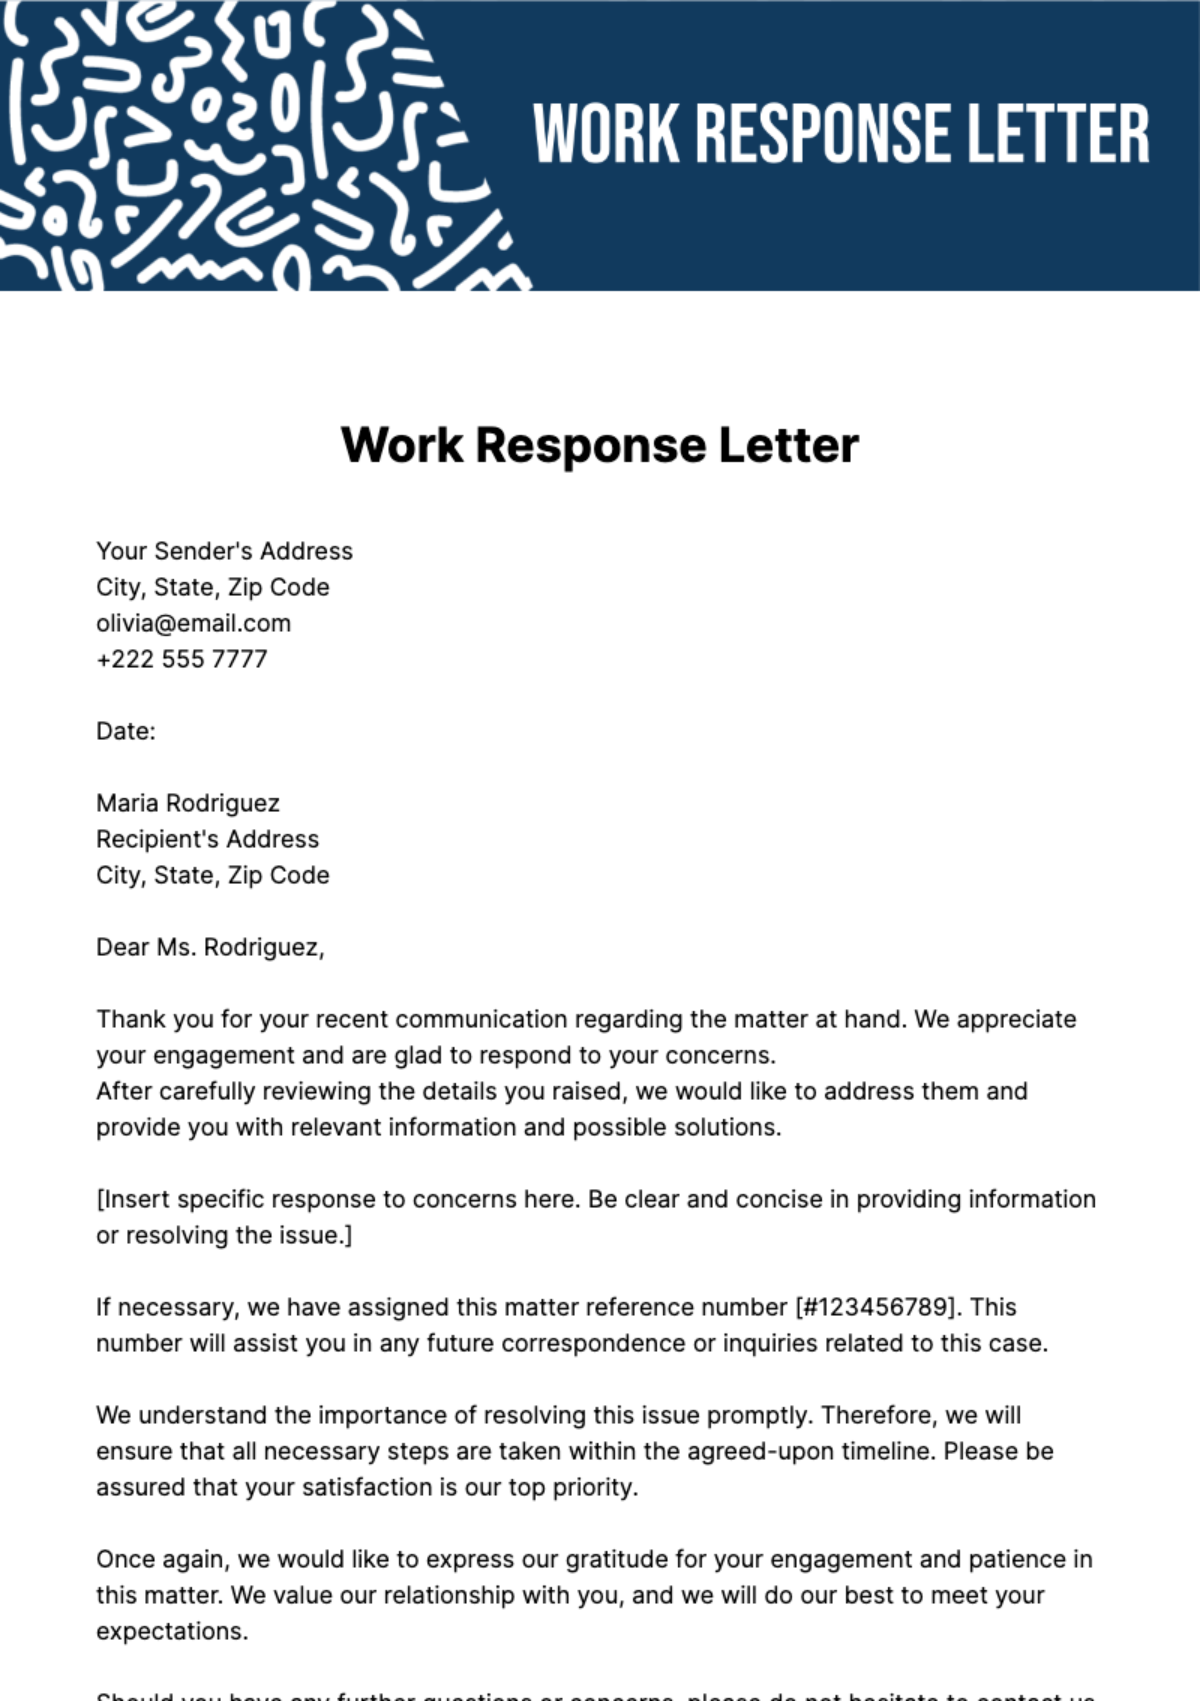 Free Work Response Letter Template